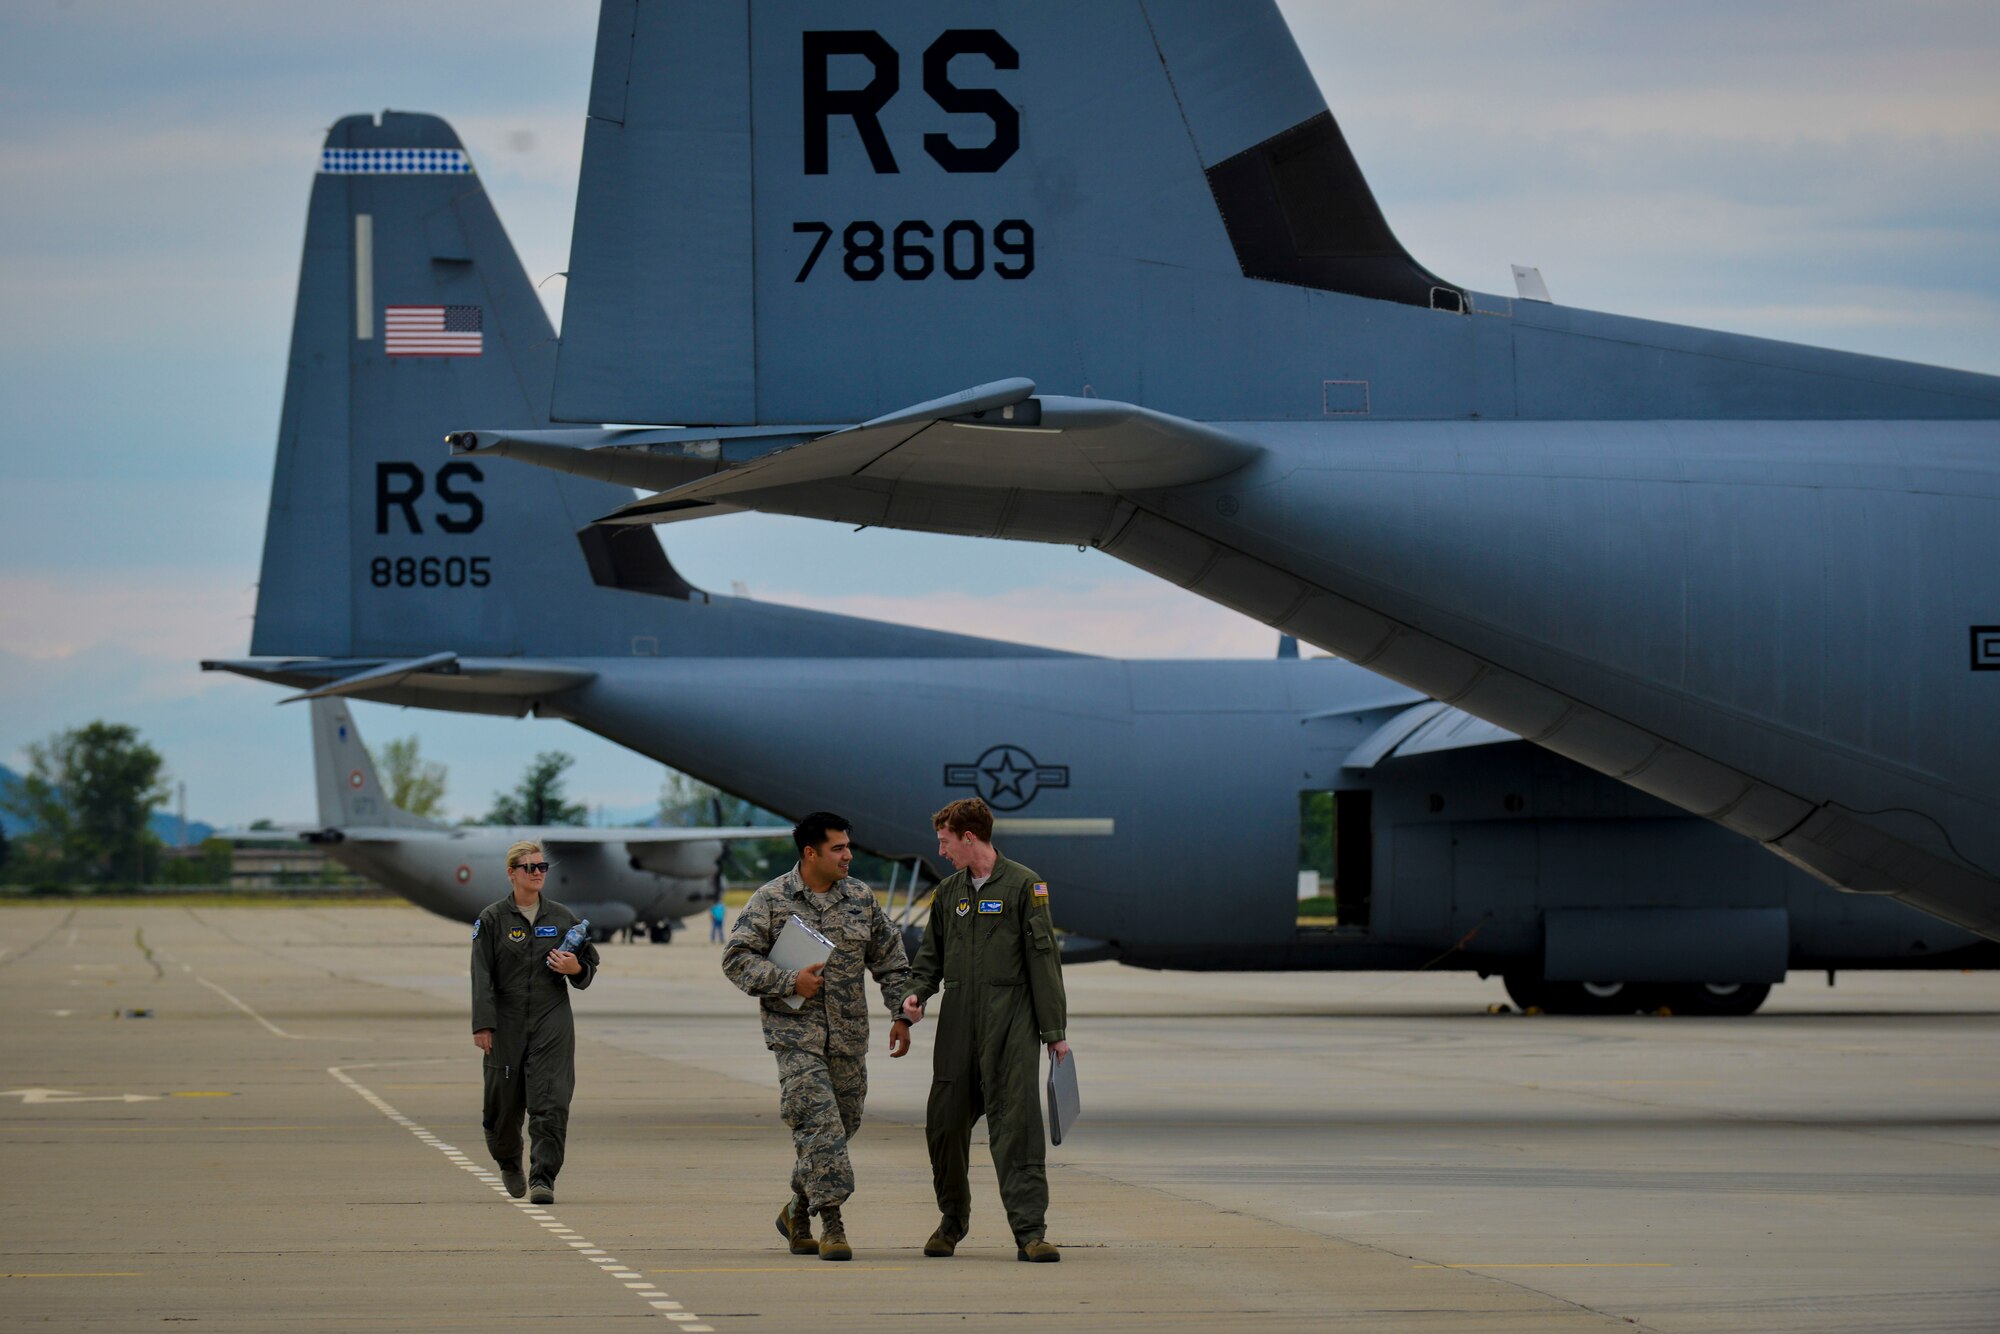 Senior Airman Emily Mitchell and Staff Sgt. Joshua Nelson, both 37th Airlift Squadron loadmasters sit on the ramp of a C-130J Super Hercules during a formation flight during Exercise Thracian Summer 2016 July 17, Plovdiv, Bulgaria. Through Exercise Thracian Summer, the U.S. and Bulgaria will enhance their mutual ability to work together, with other NATO nations, and with key partners on regional security (U.S. Air Force photo/Senior Airman Nicole Keim)